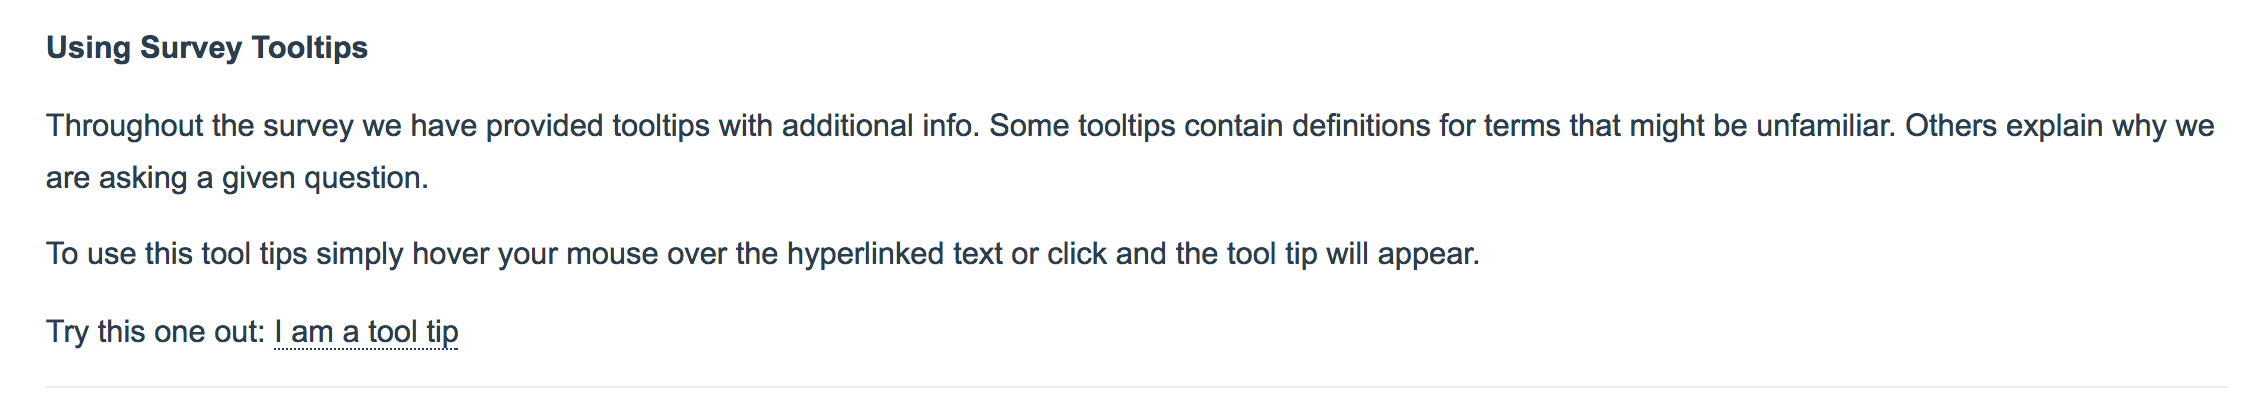 Example Instructions for Using Tooltips